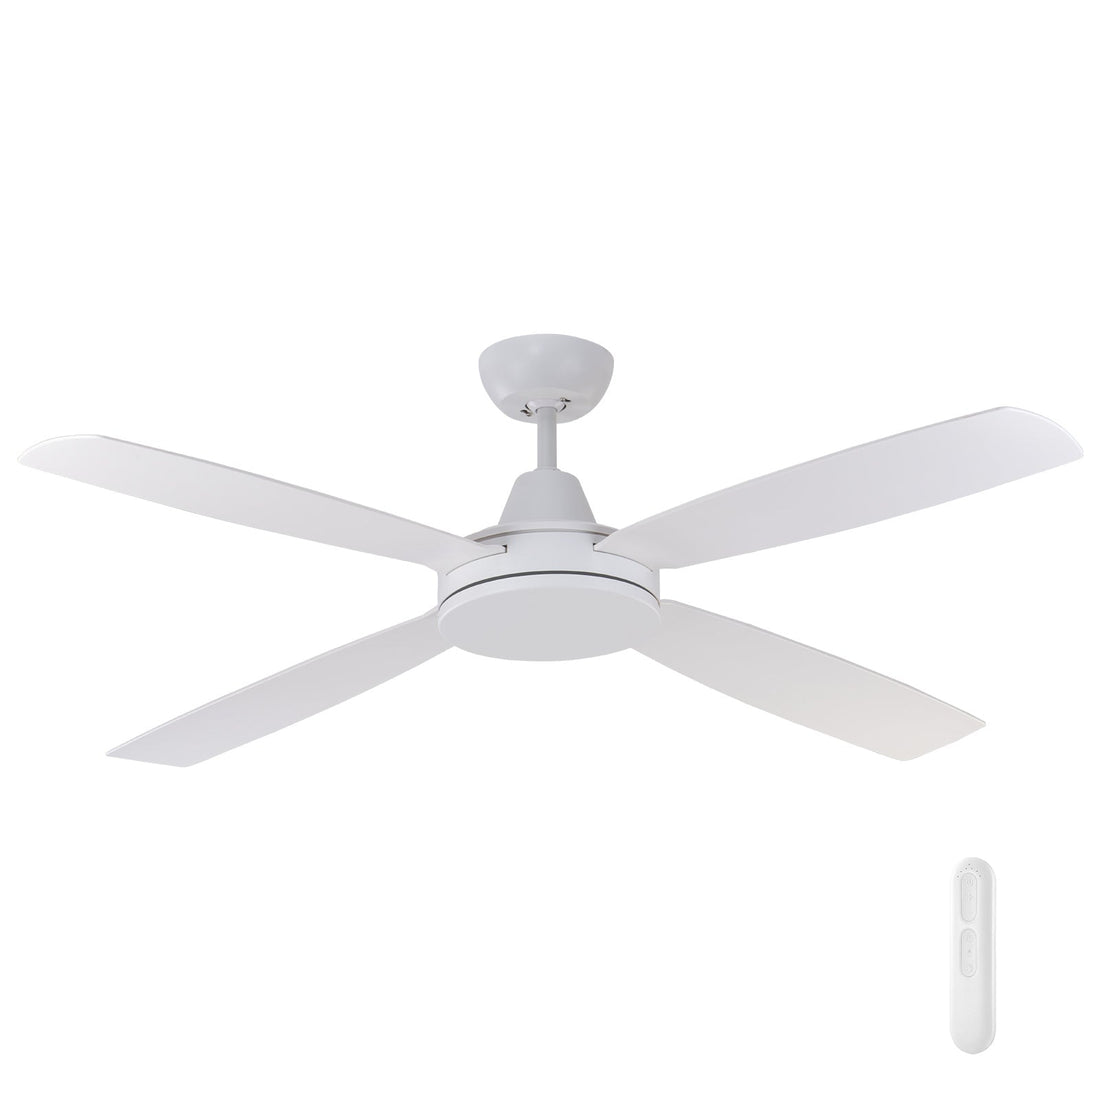 Nemoi DC Ceiling Fan with Remote Mercator